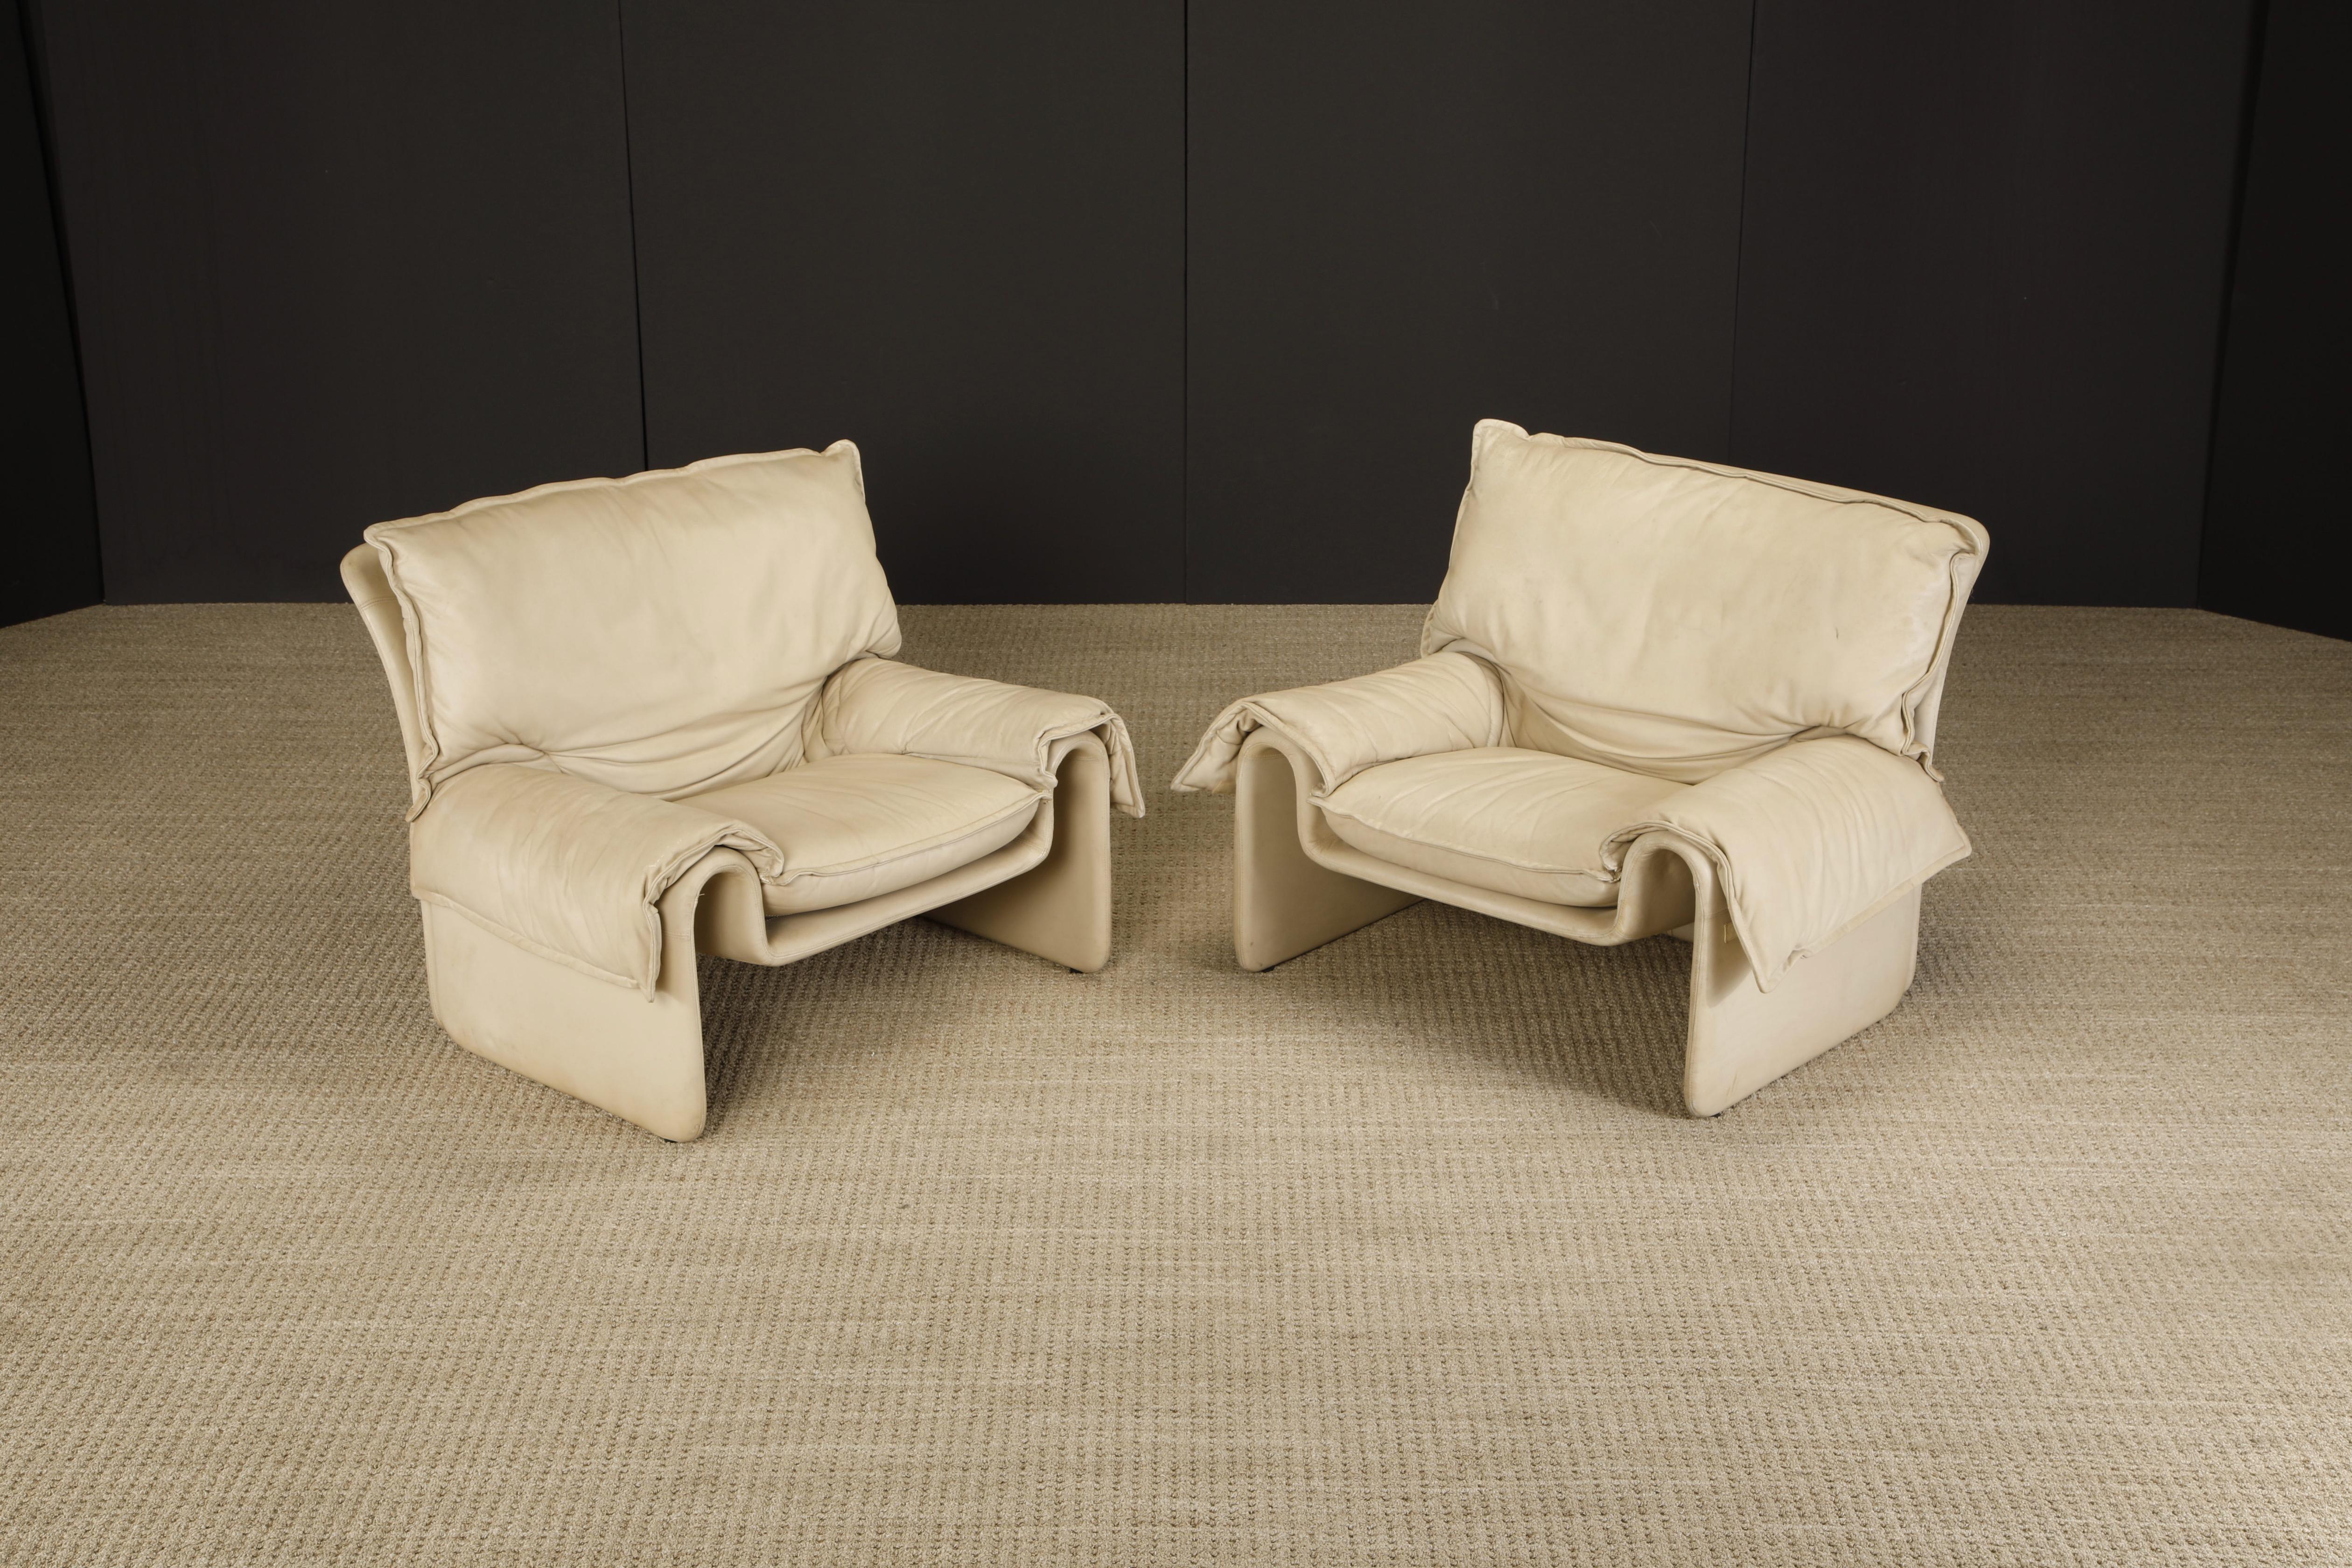 Modern 'Sara' Leather Lounge Chairs by Guido Faleschini for Mariani, c 1971, Signed For Sale